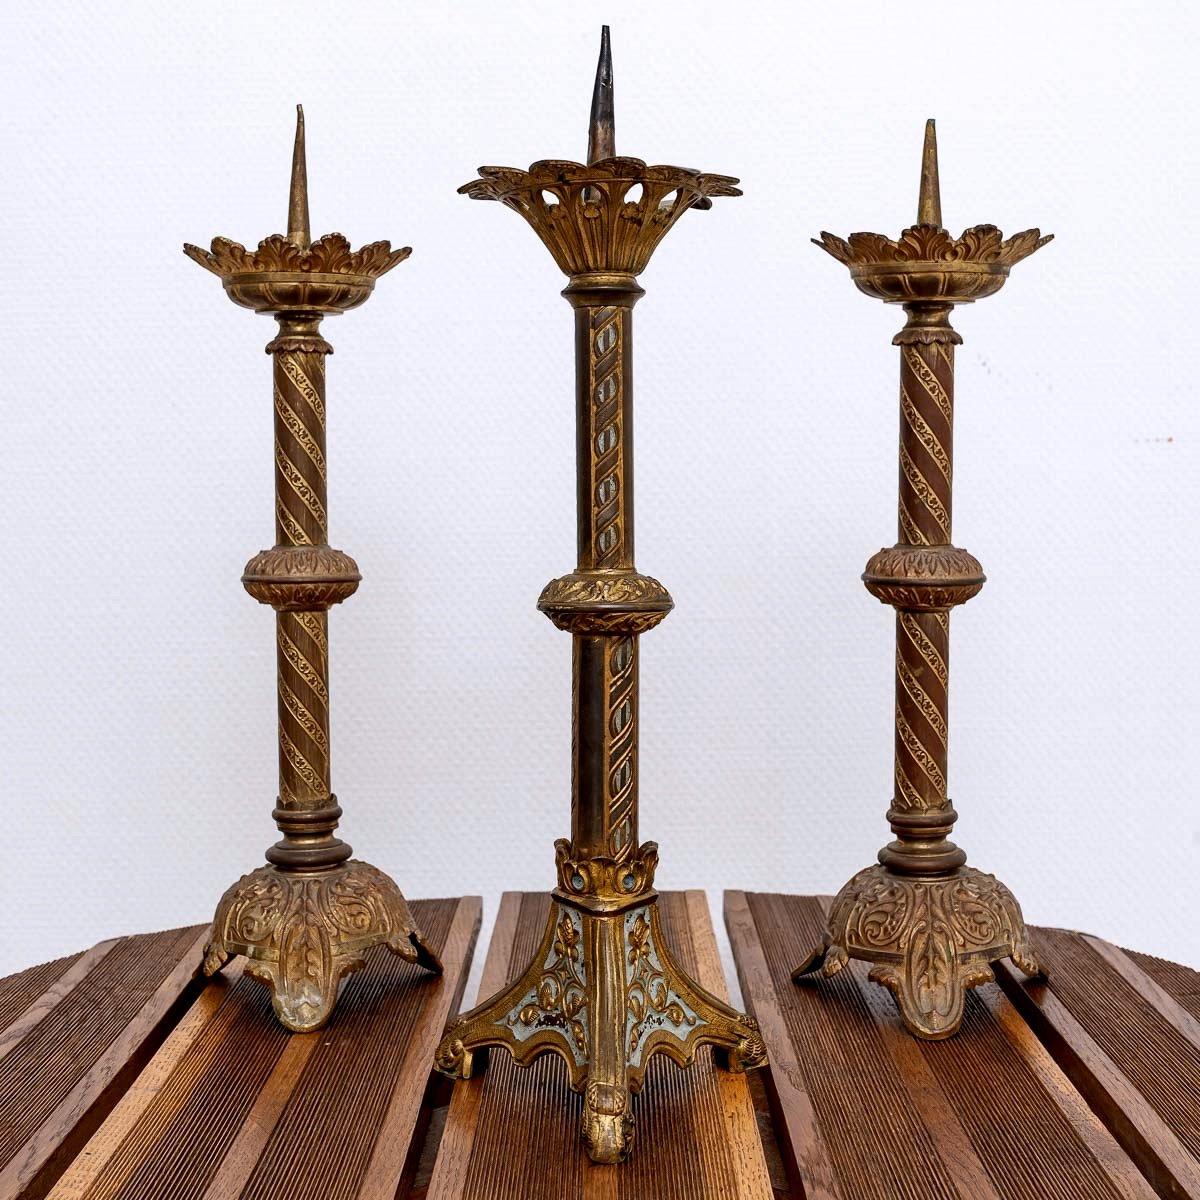 A delightful set of three bronze altar candlesticks.
Originally, candlesticks usually stood on three legs, topped with a knot and a wick to hold the wax.
In the centre of this cup is a spike on which the candle is placed. The candles on top are made